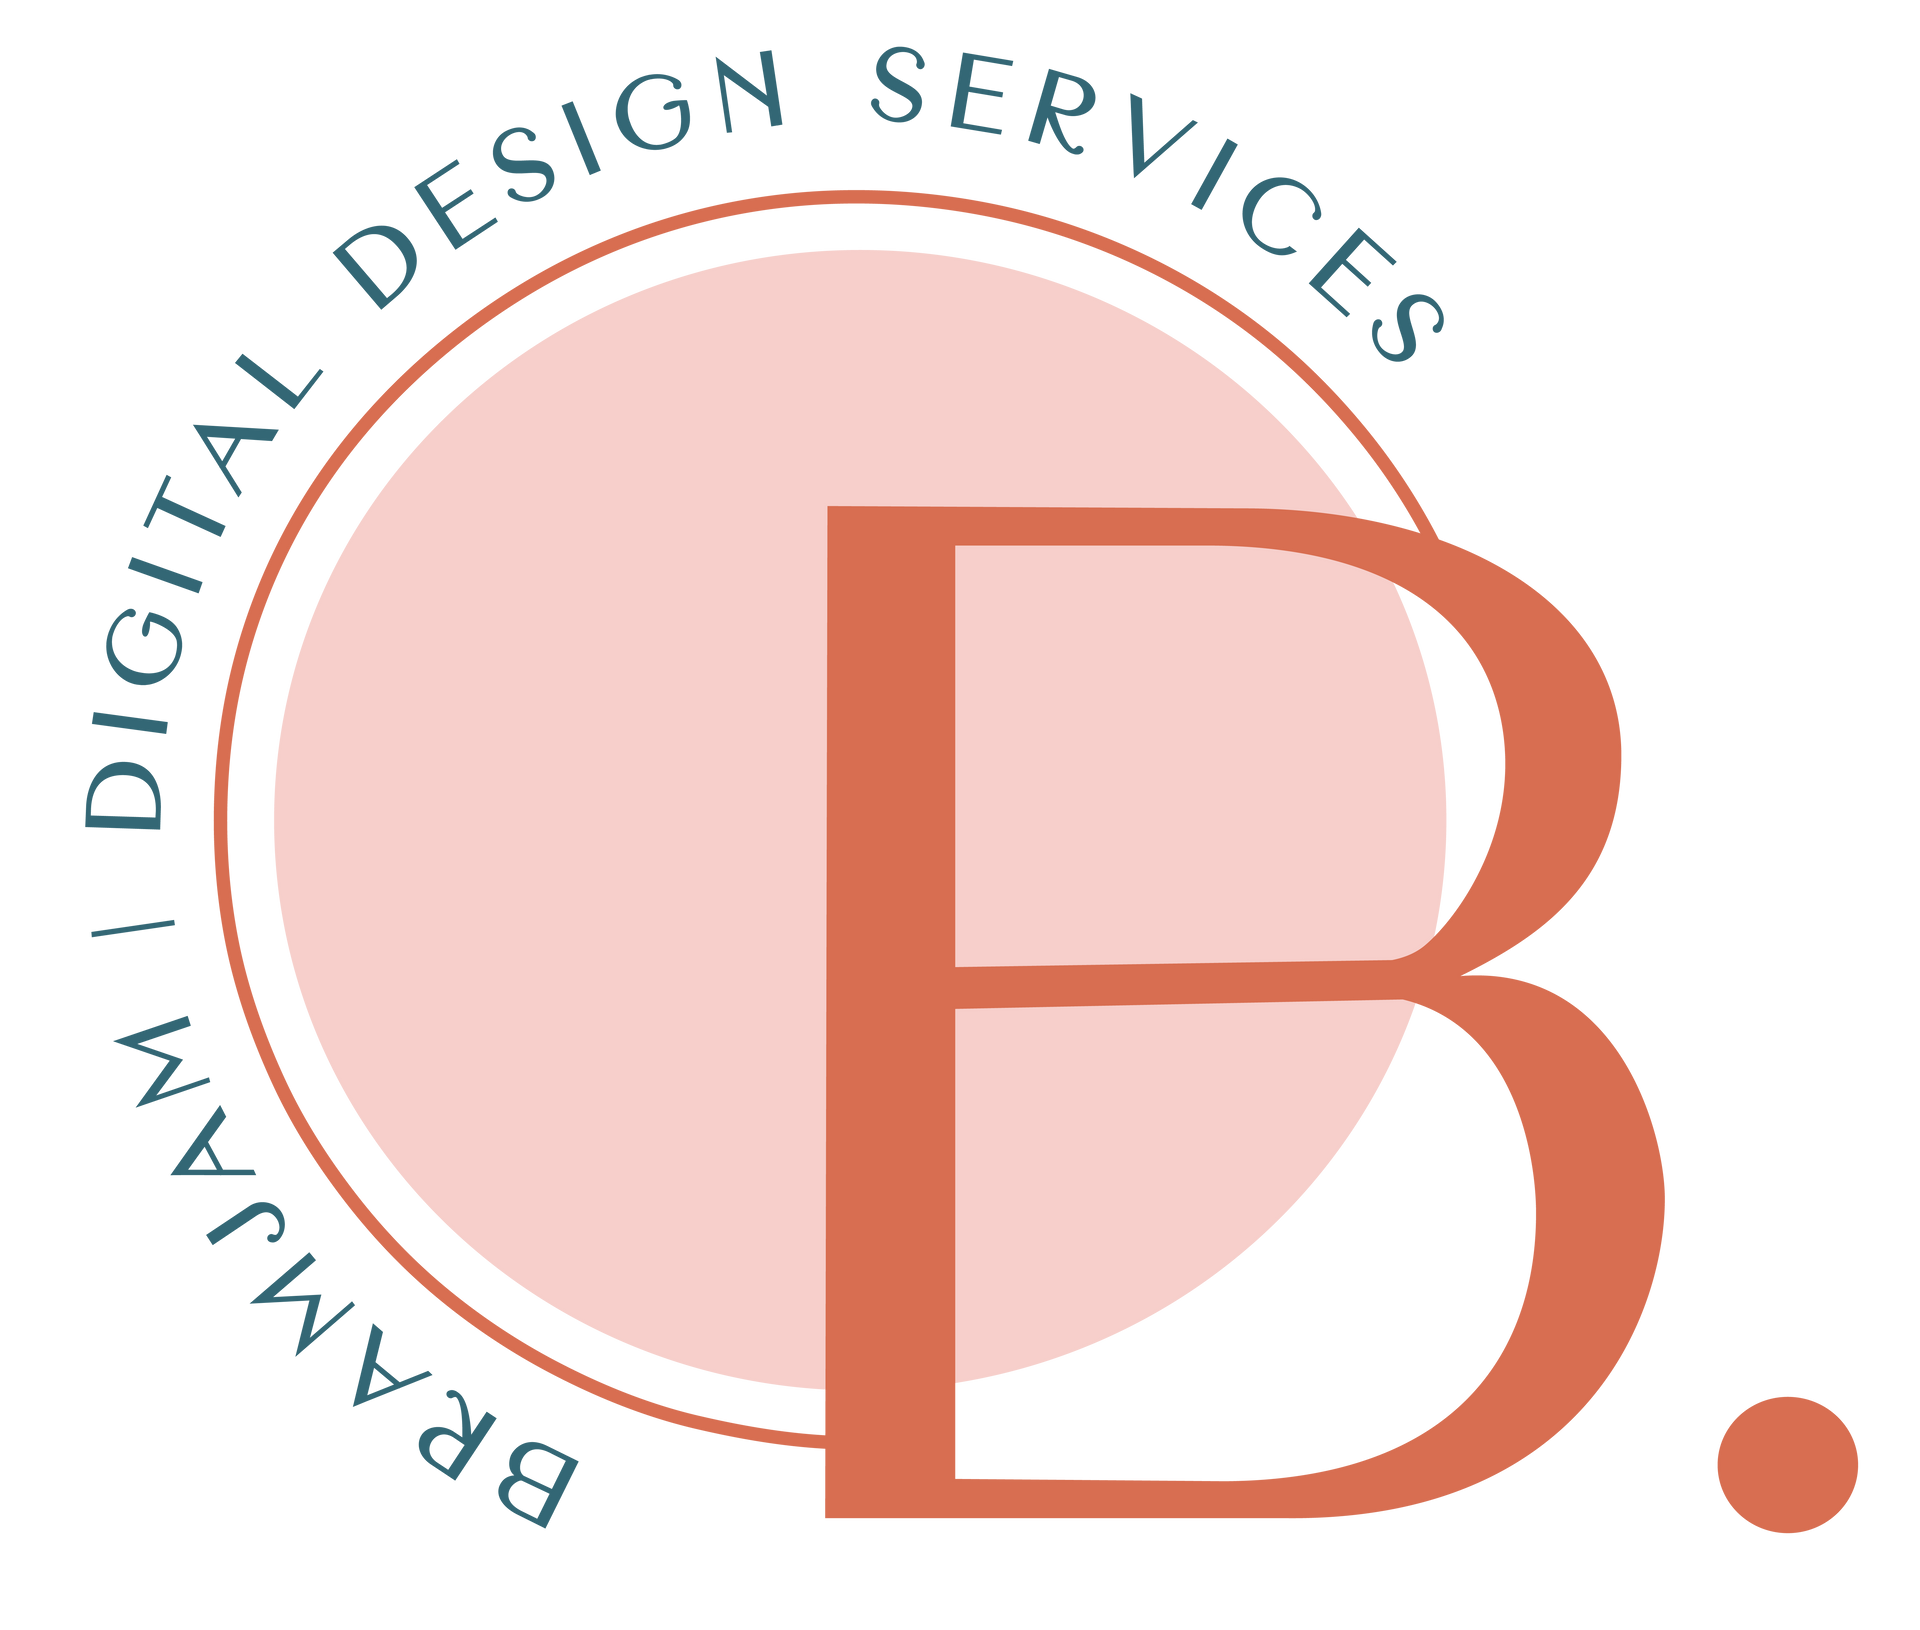 a logo for digital design services with a letter b in a circle .